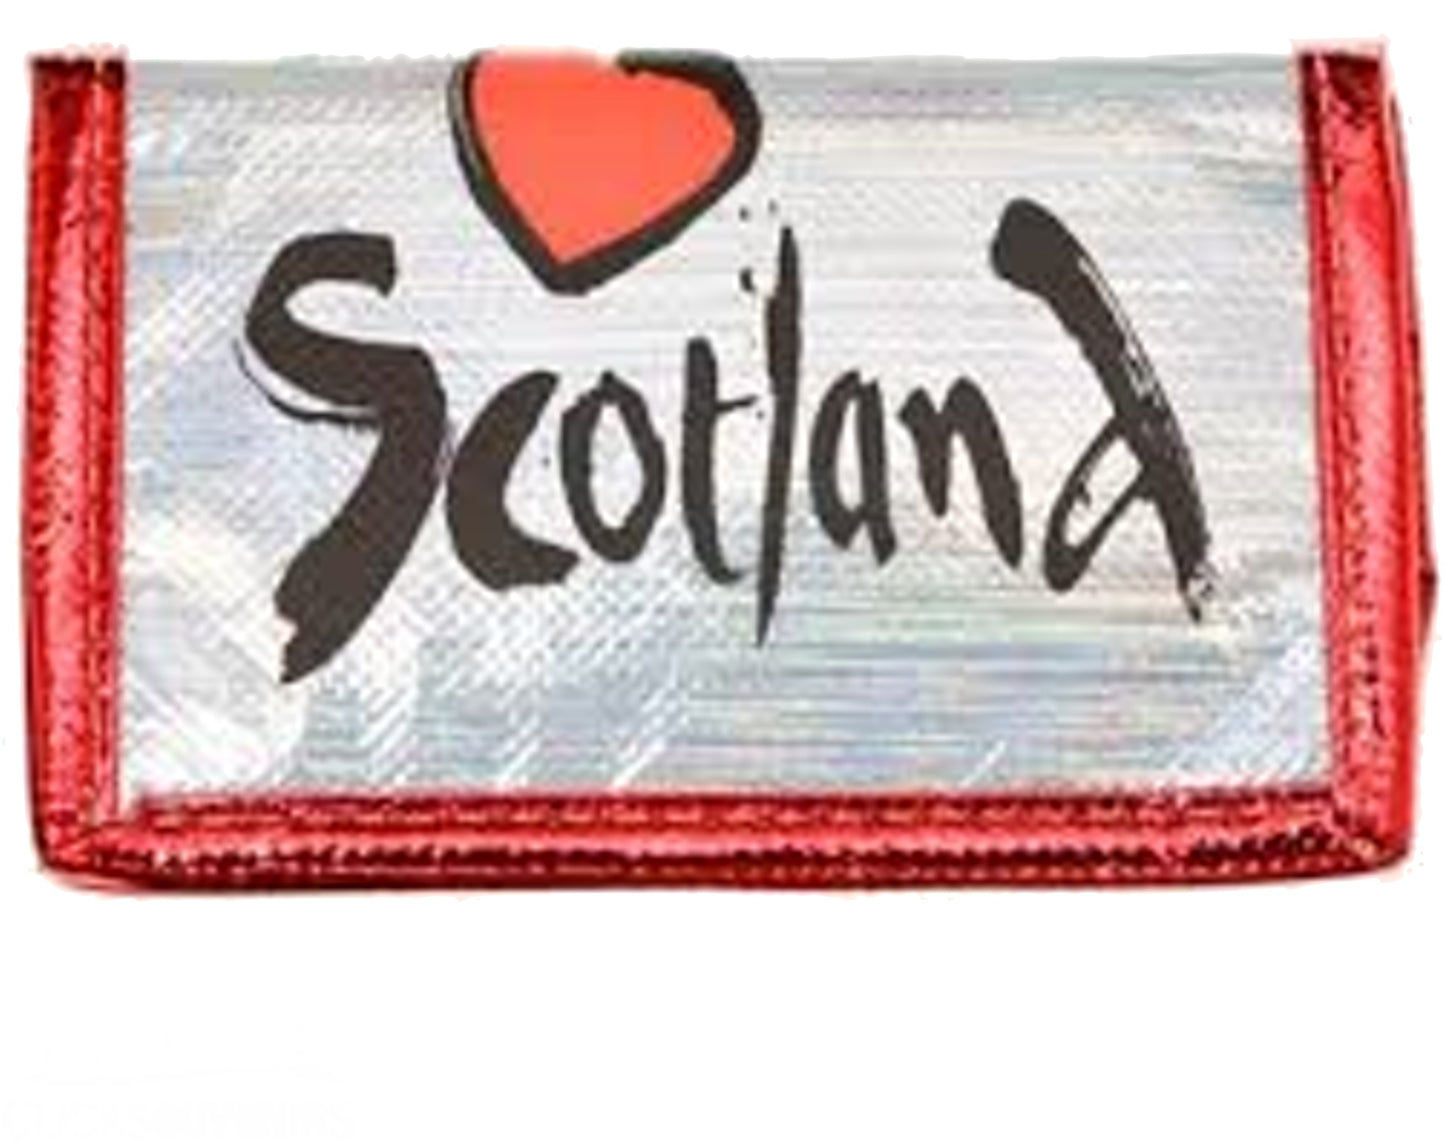 Scotland Silver & Red Wallet Purse With Zip Coin section